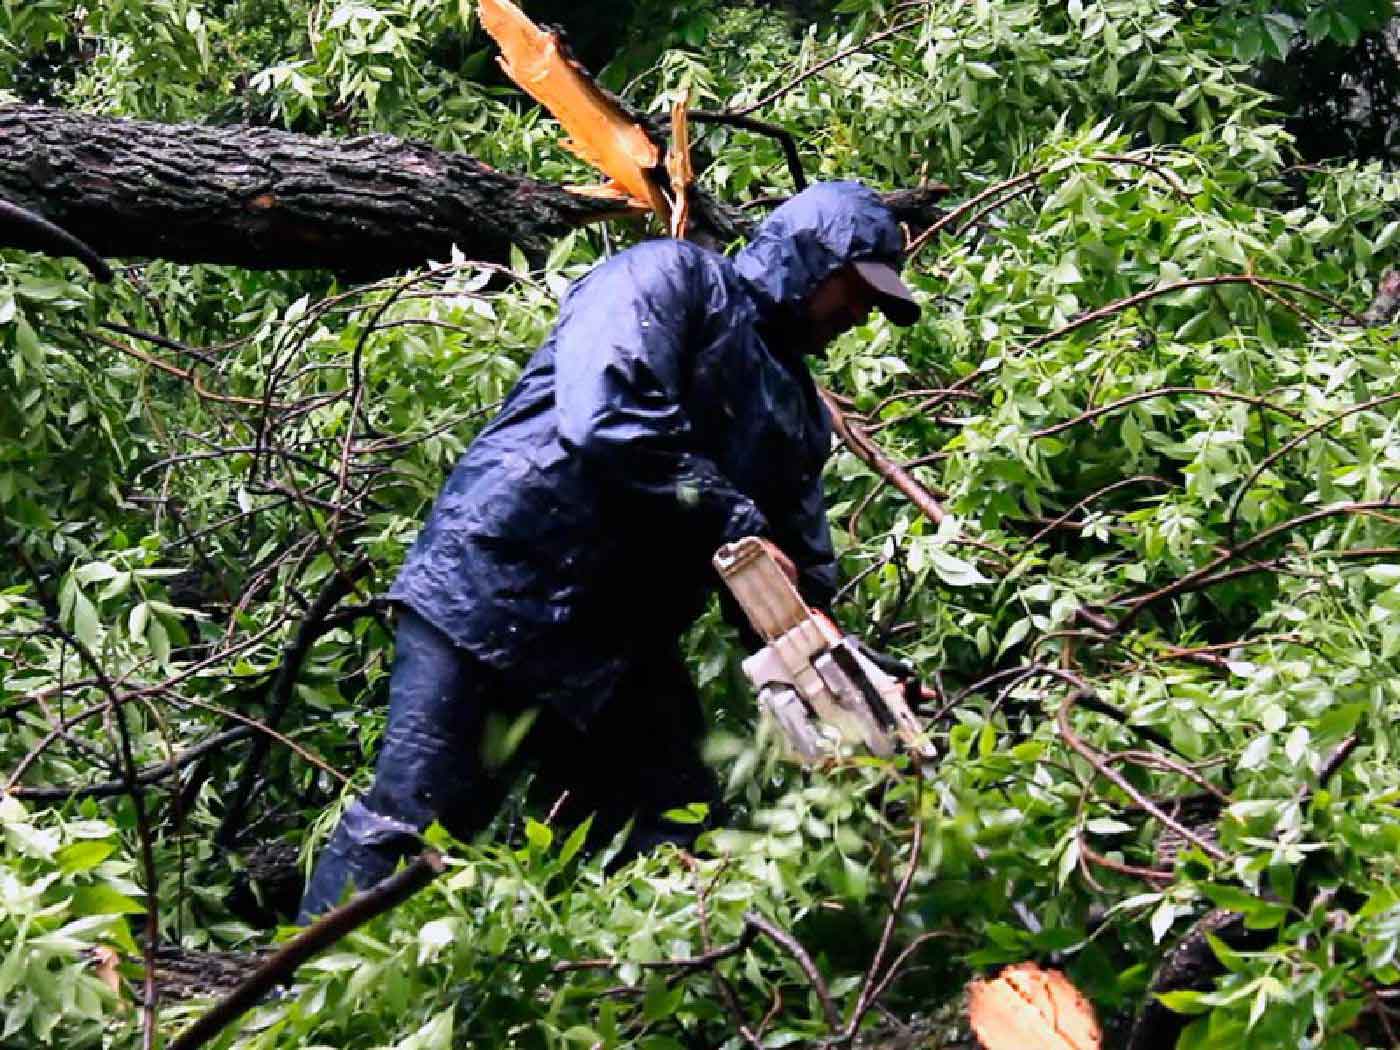 Fellers Tree Felling, Professional Tree Fellers, Very Good Rates, Tree Felling Services, Garden Cleaning Service, Excellent Safety And Service Record